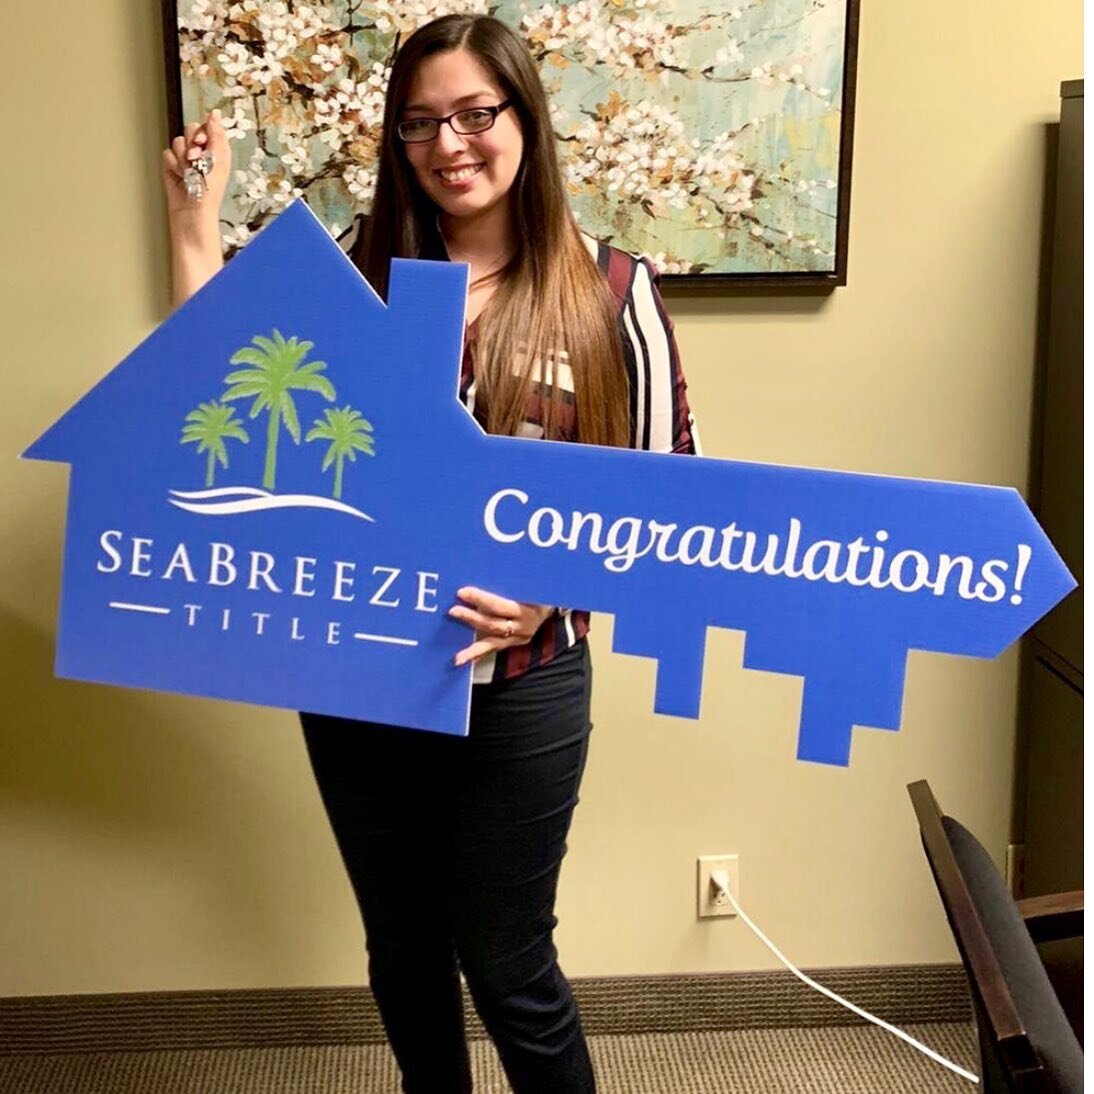 Congratulations on your new home! #closingday #newhome #titlecompany #realestate #seabreezetitle